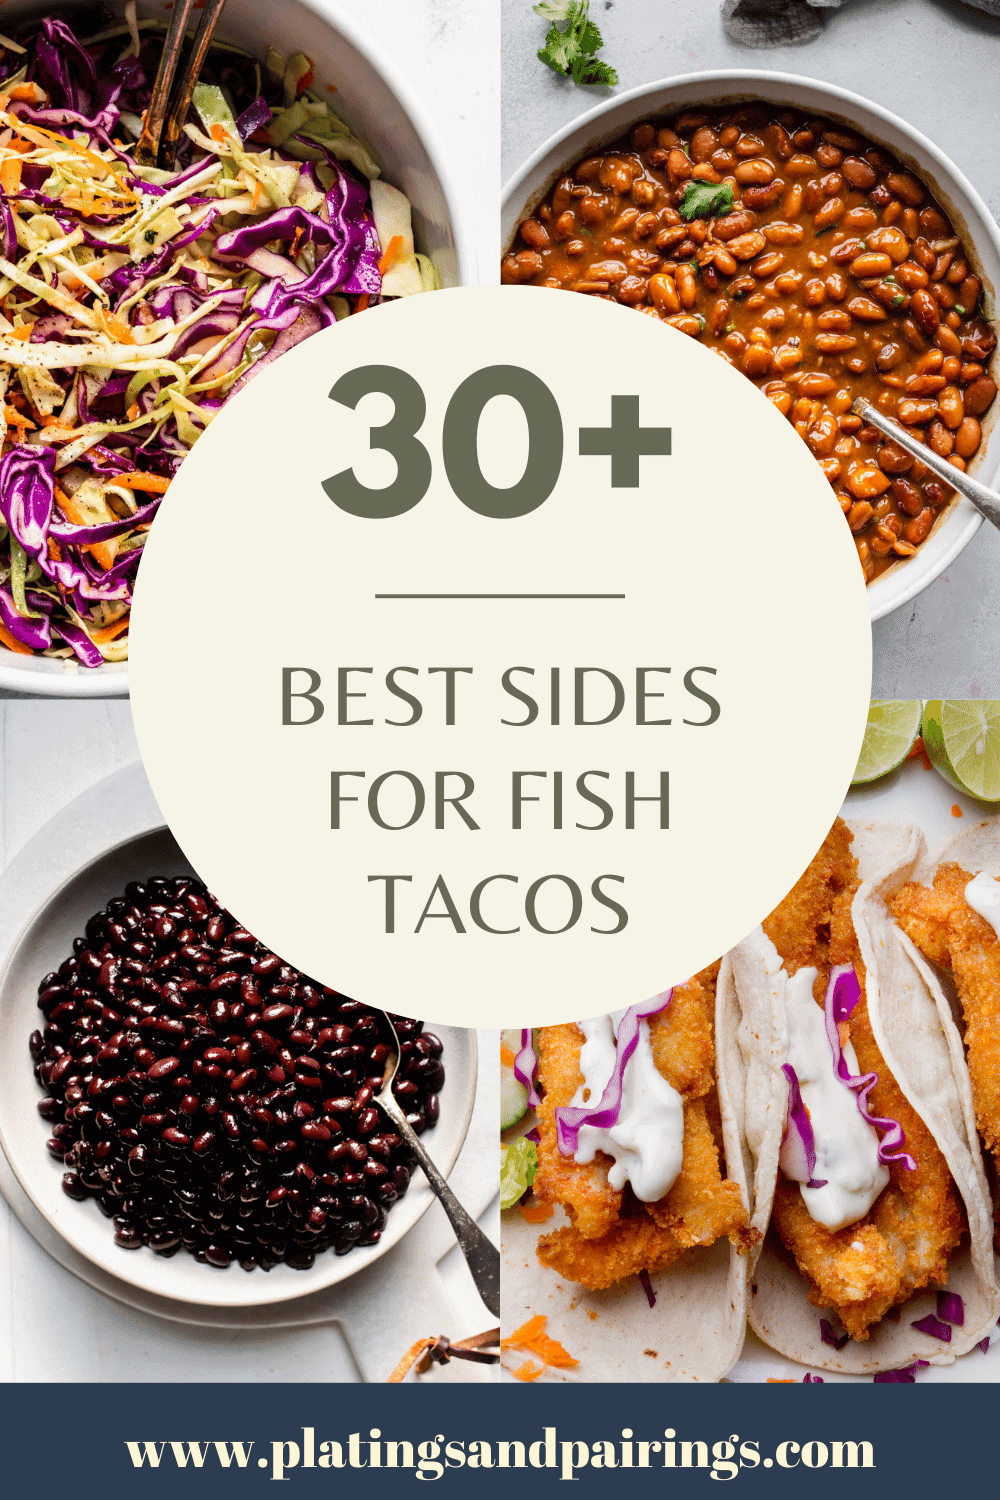 Collage of fish taco side dishes with text overlay - best sides for fish tacos.